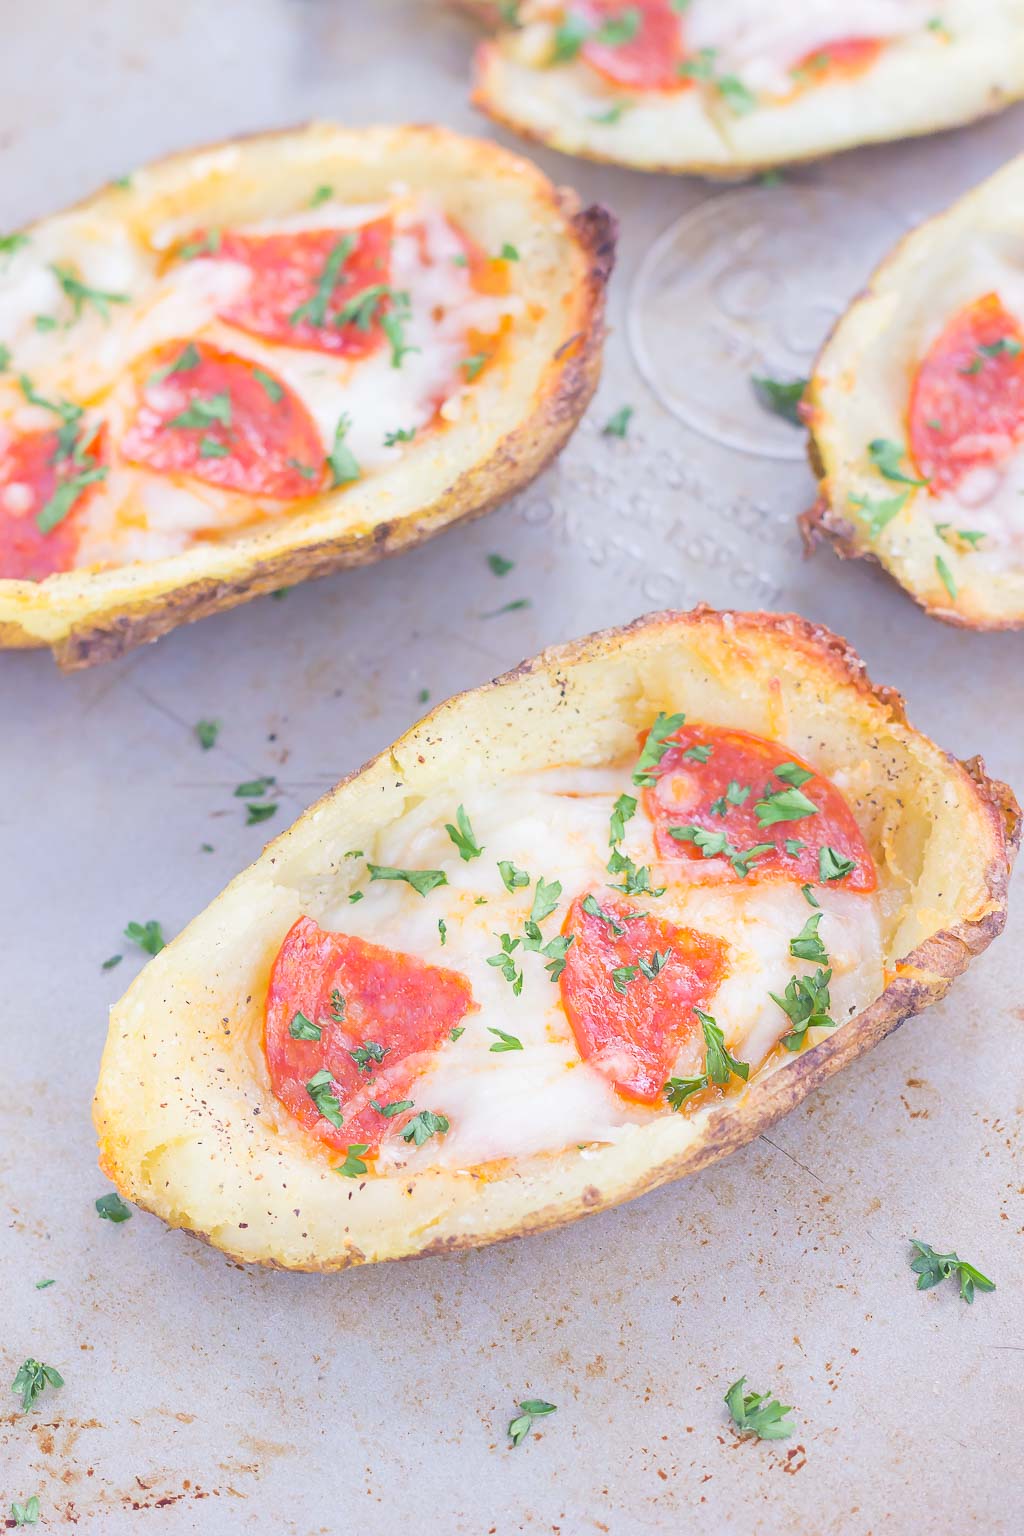 Loaded with pizza sauce, fresh mozzarella cheese, pepperoni and seasonings, these Pizza Potato Skins are sure to be a crowd-pleasing appetizer or snack! #potatoskins #pizza #pizzapotatoskins #potatoskinrecipe #appetizer #easyappetizer